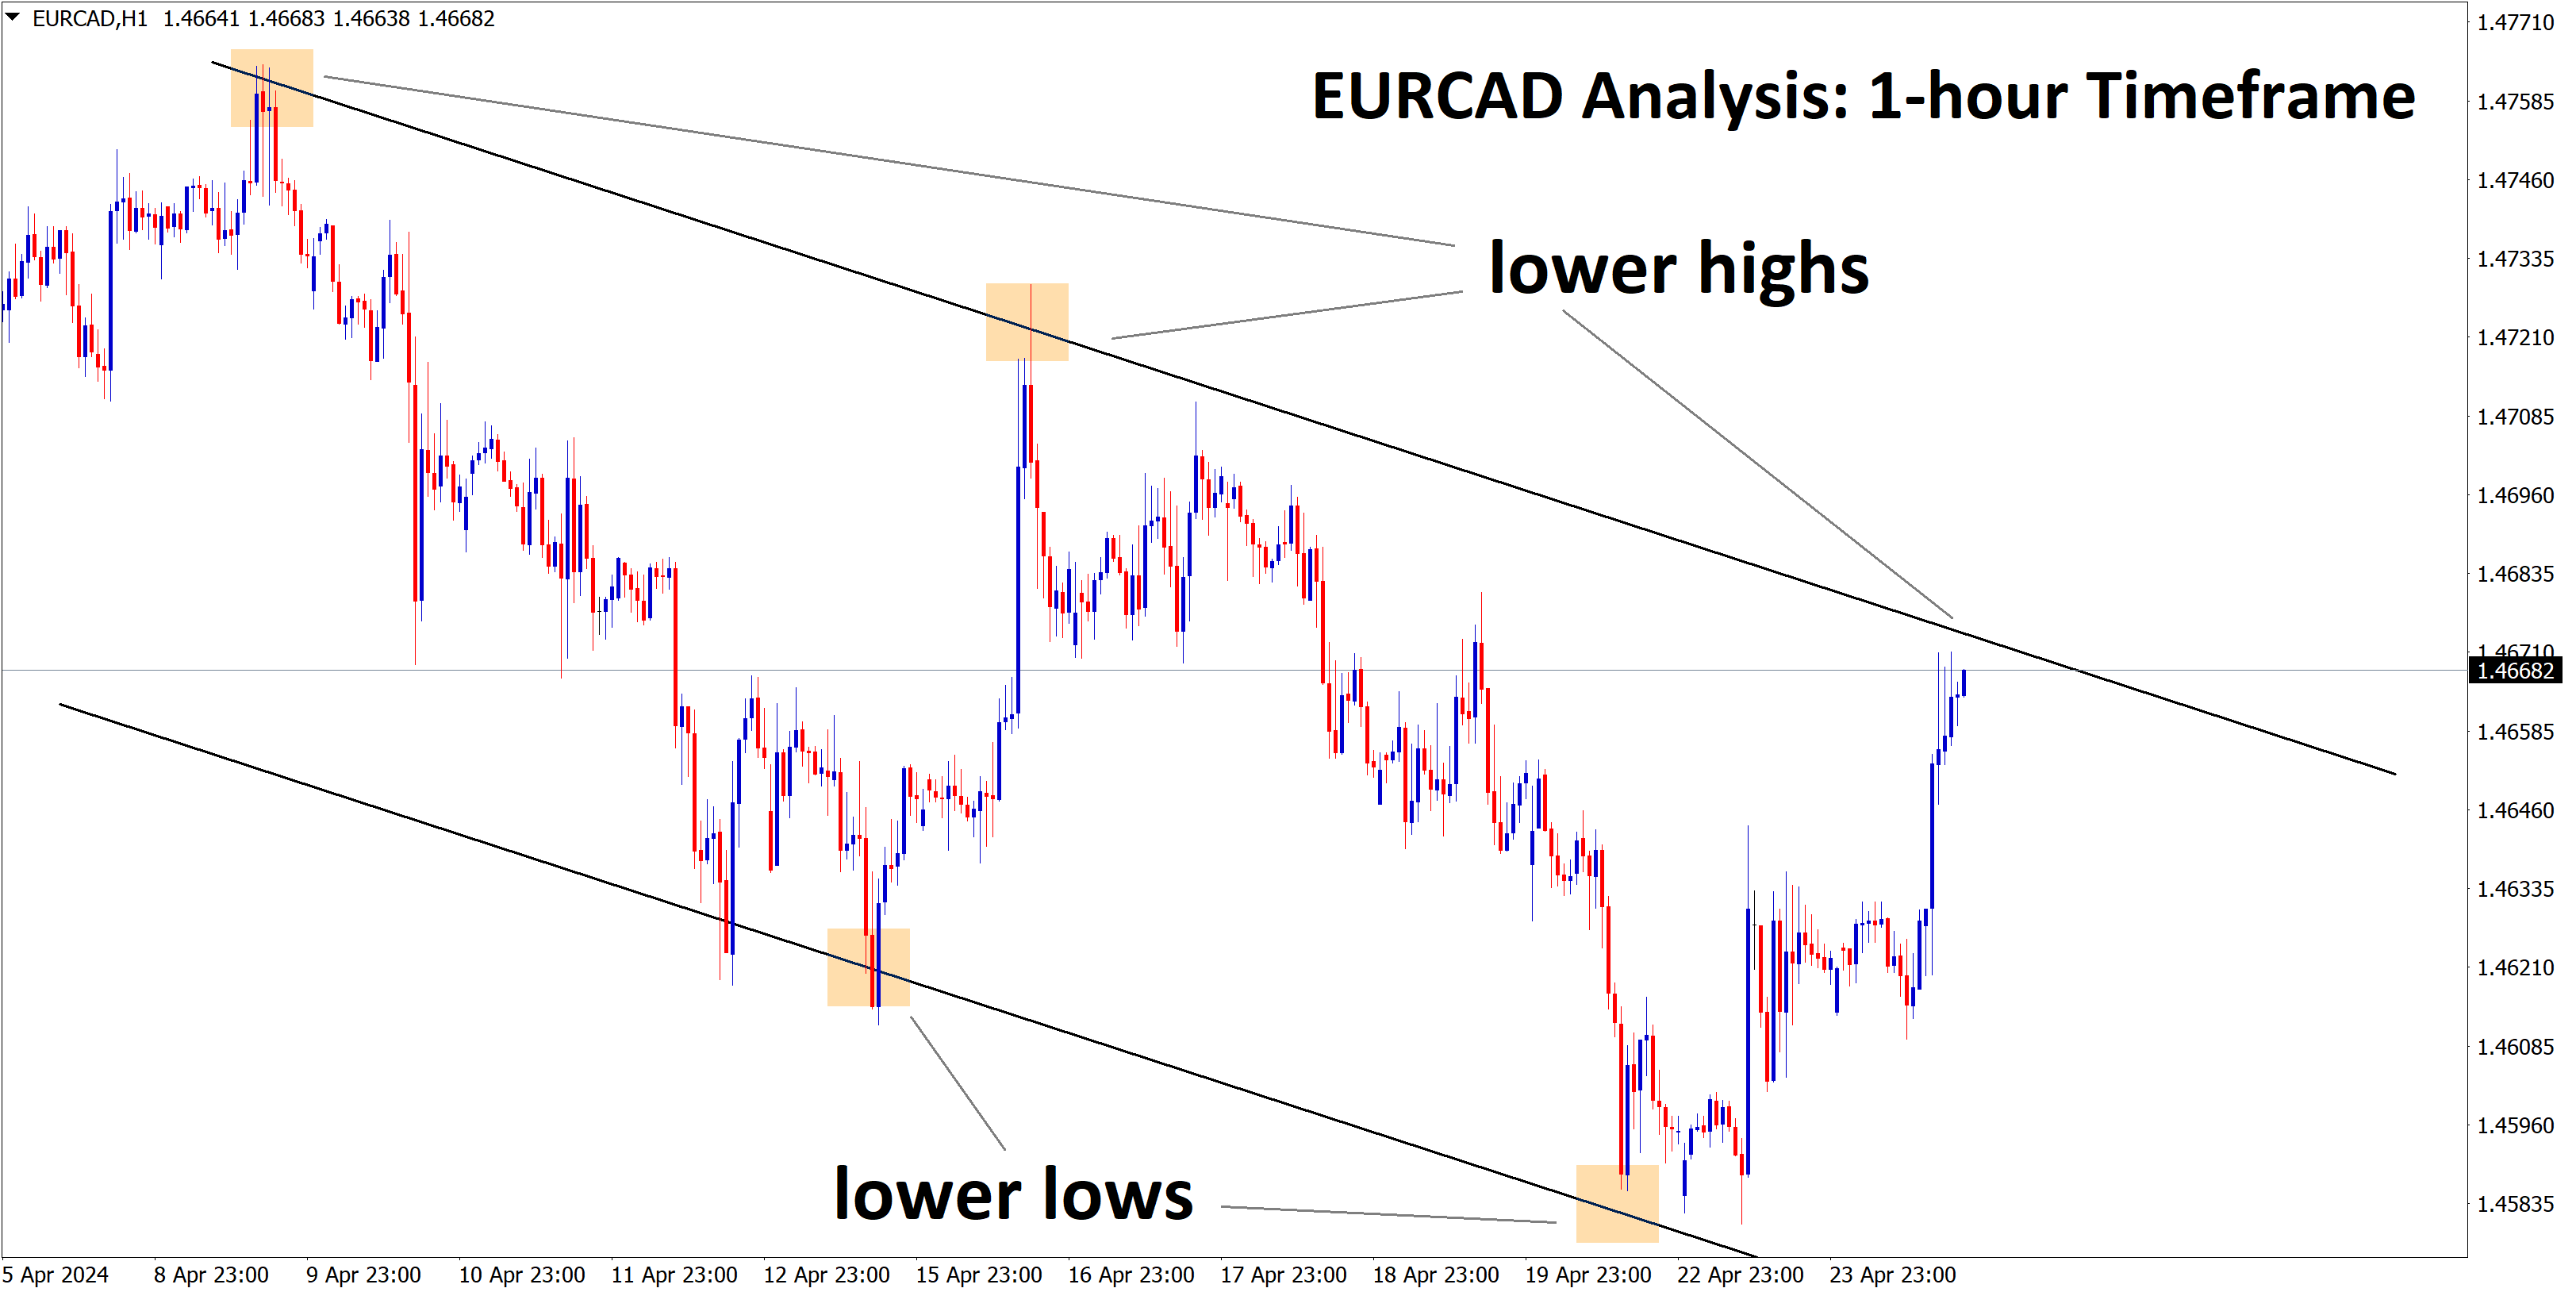 +730 Points Reached in EURCAD Buy signal after reached the lower high area